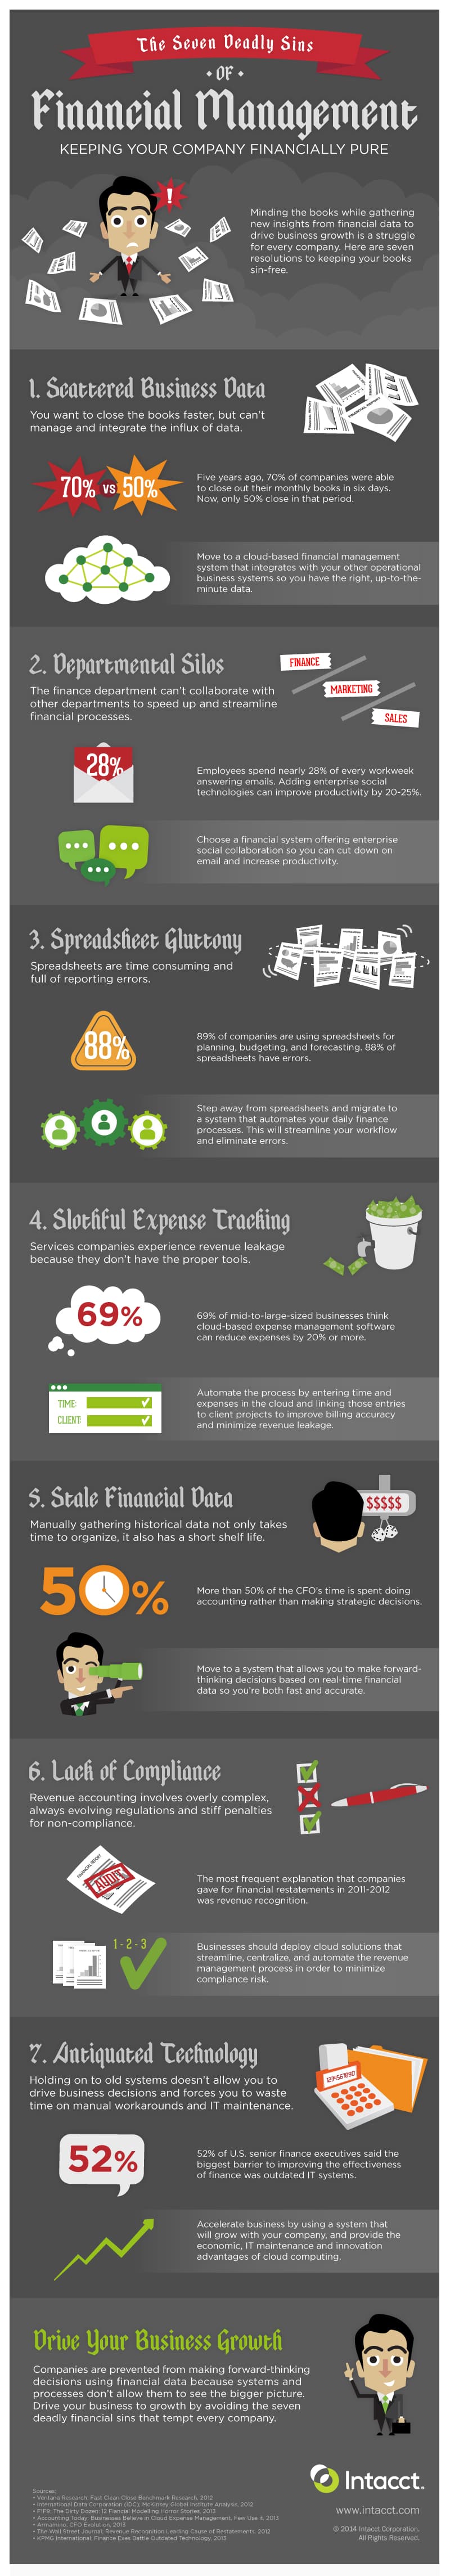 infographic financial management mistakes